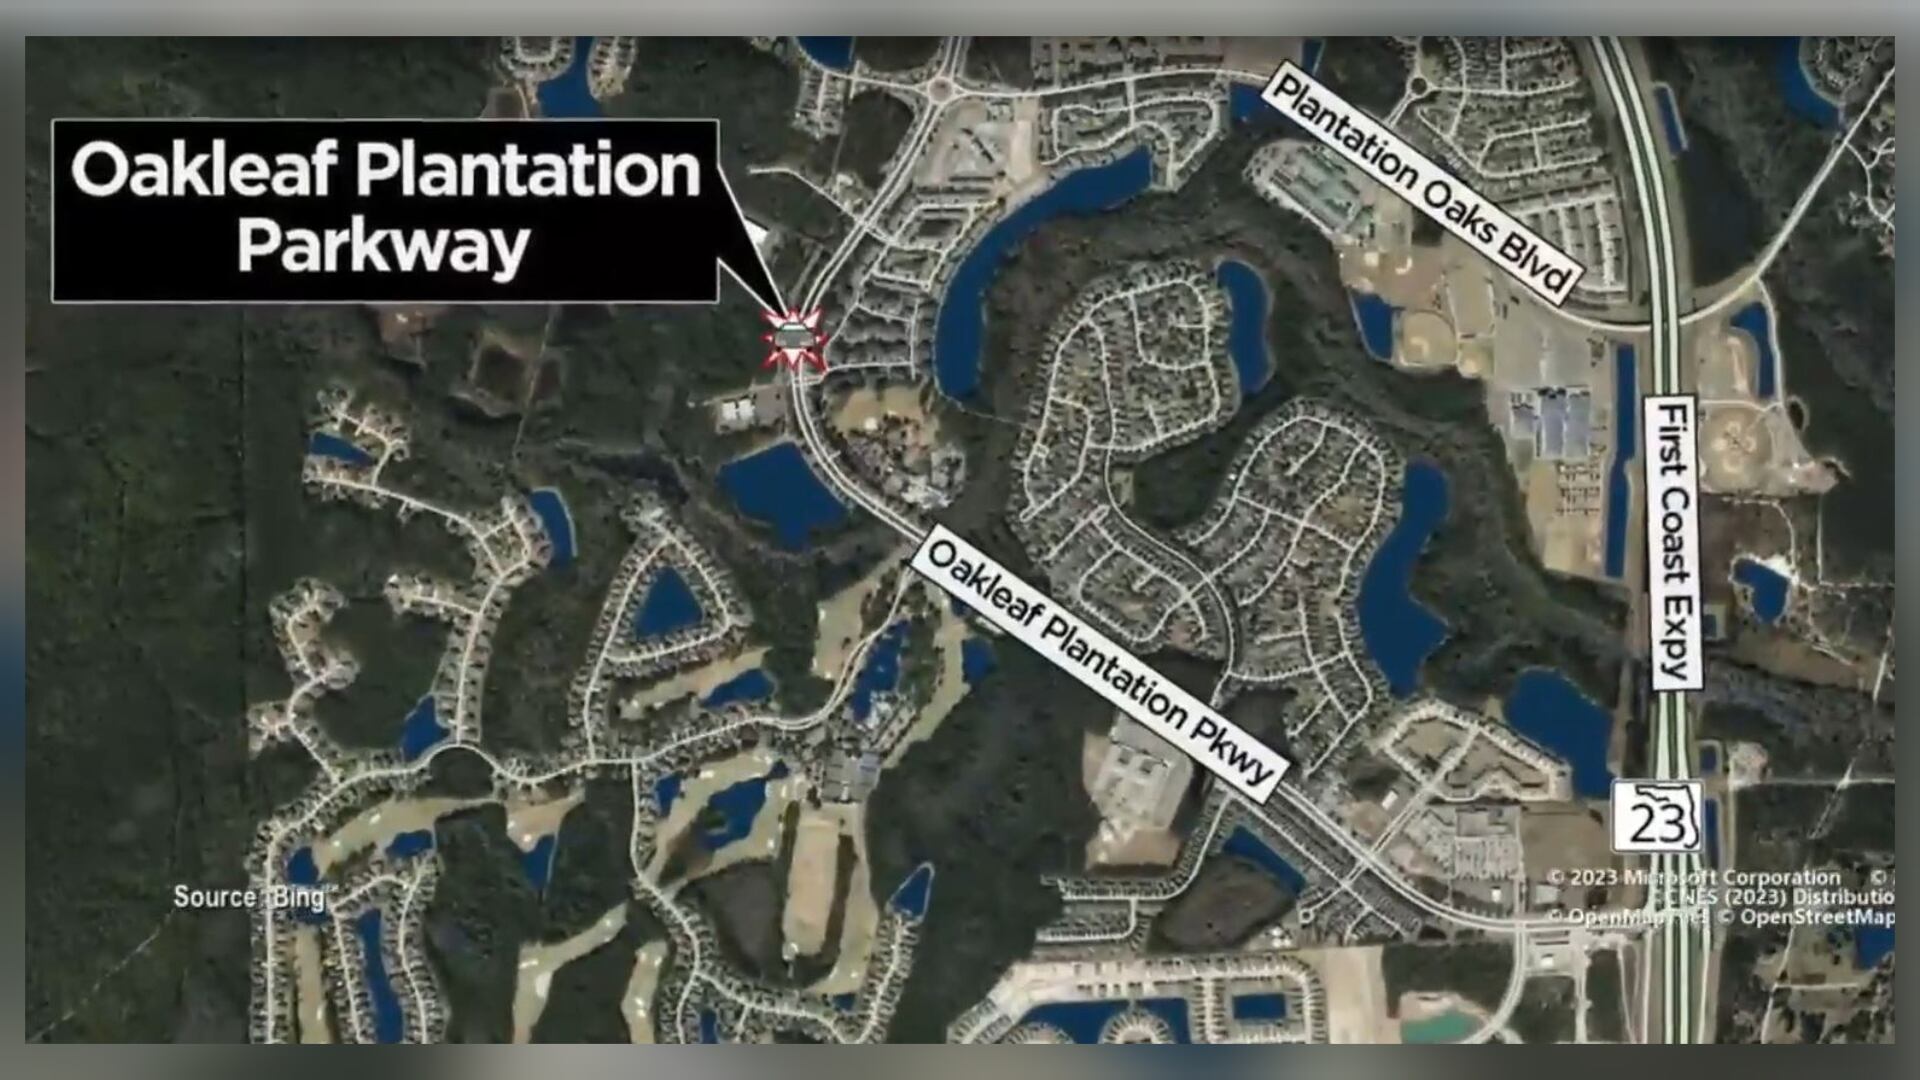 Clay County commissioners to discuss changes to ‘dangerous’ roadway — Oakleaf Plantation Parkway